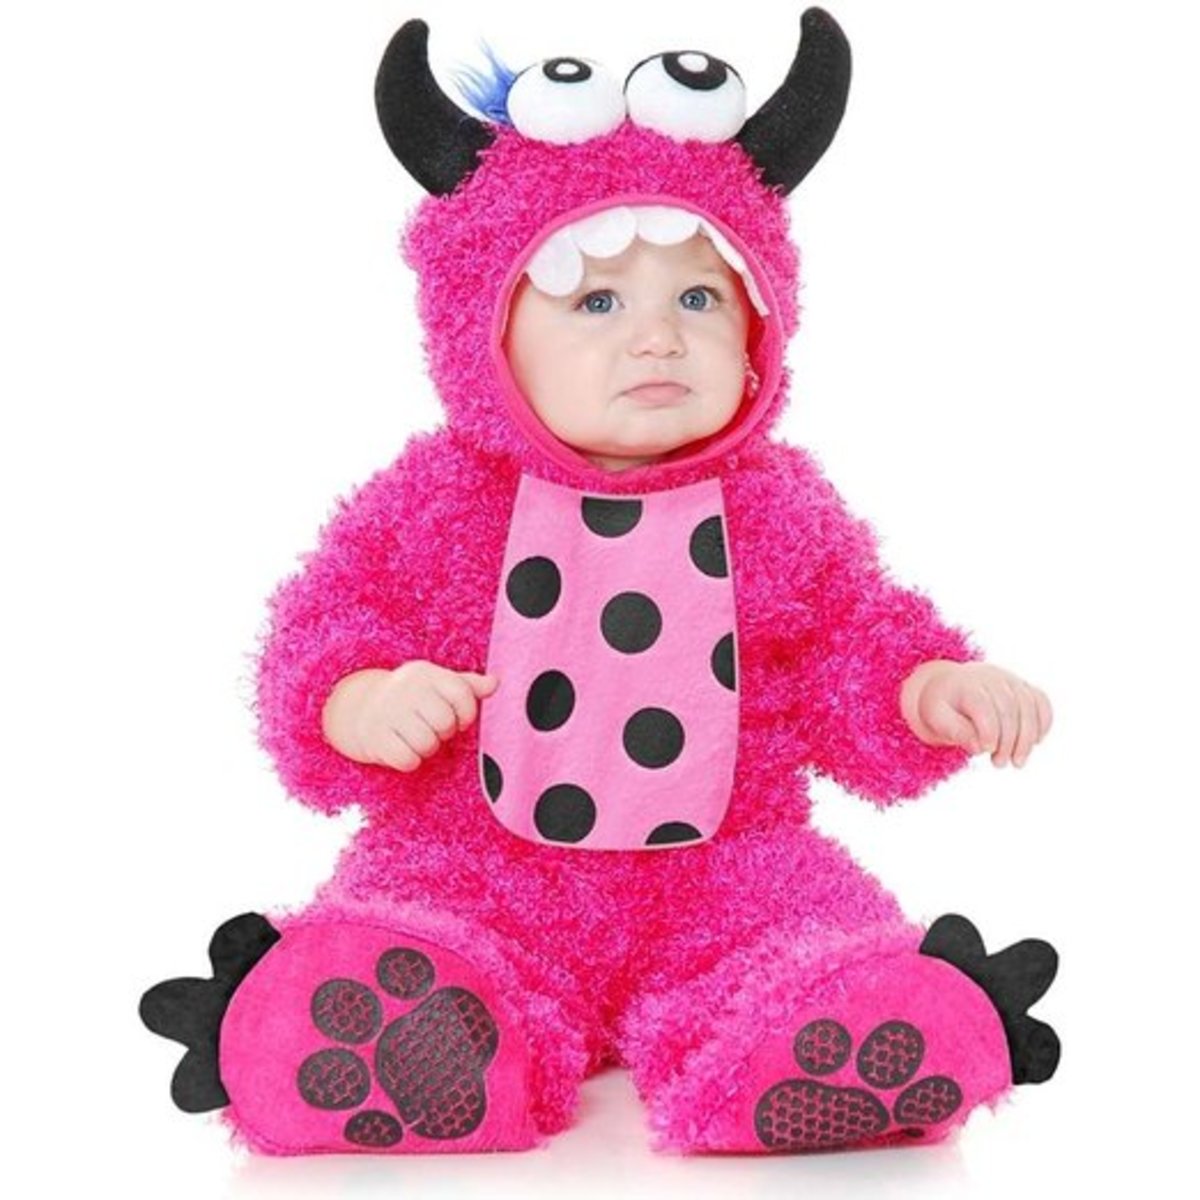 monster-baby-costumes